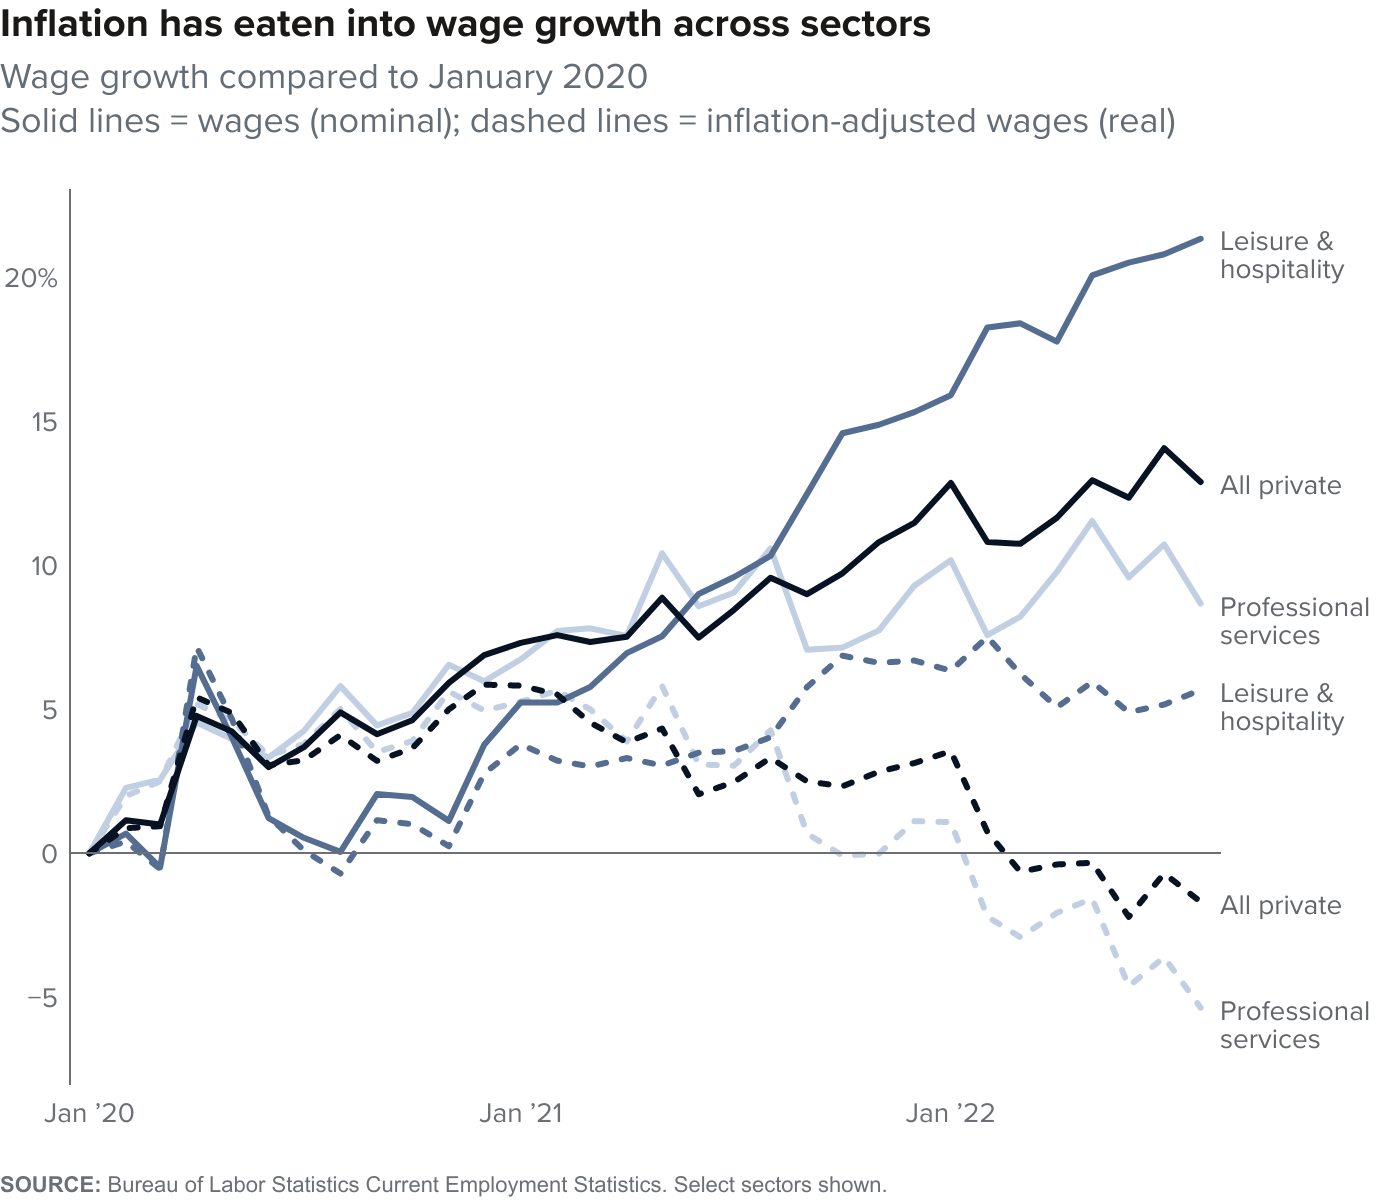 figure fallback image - Inflation has eaten into wage growth across sectors